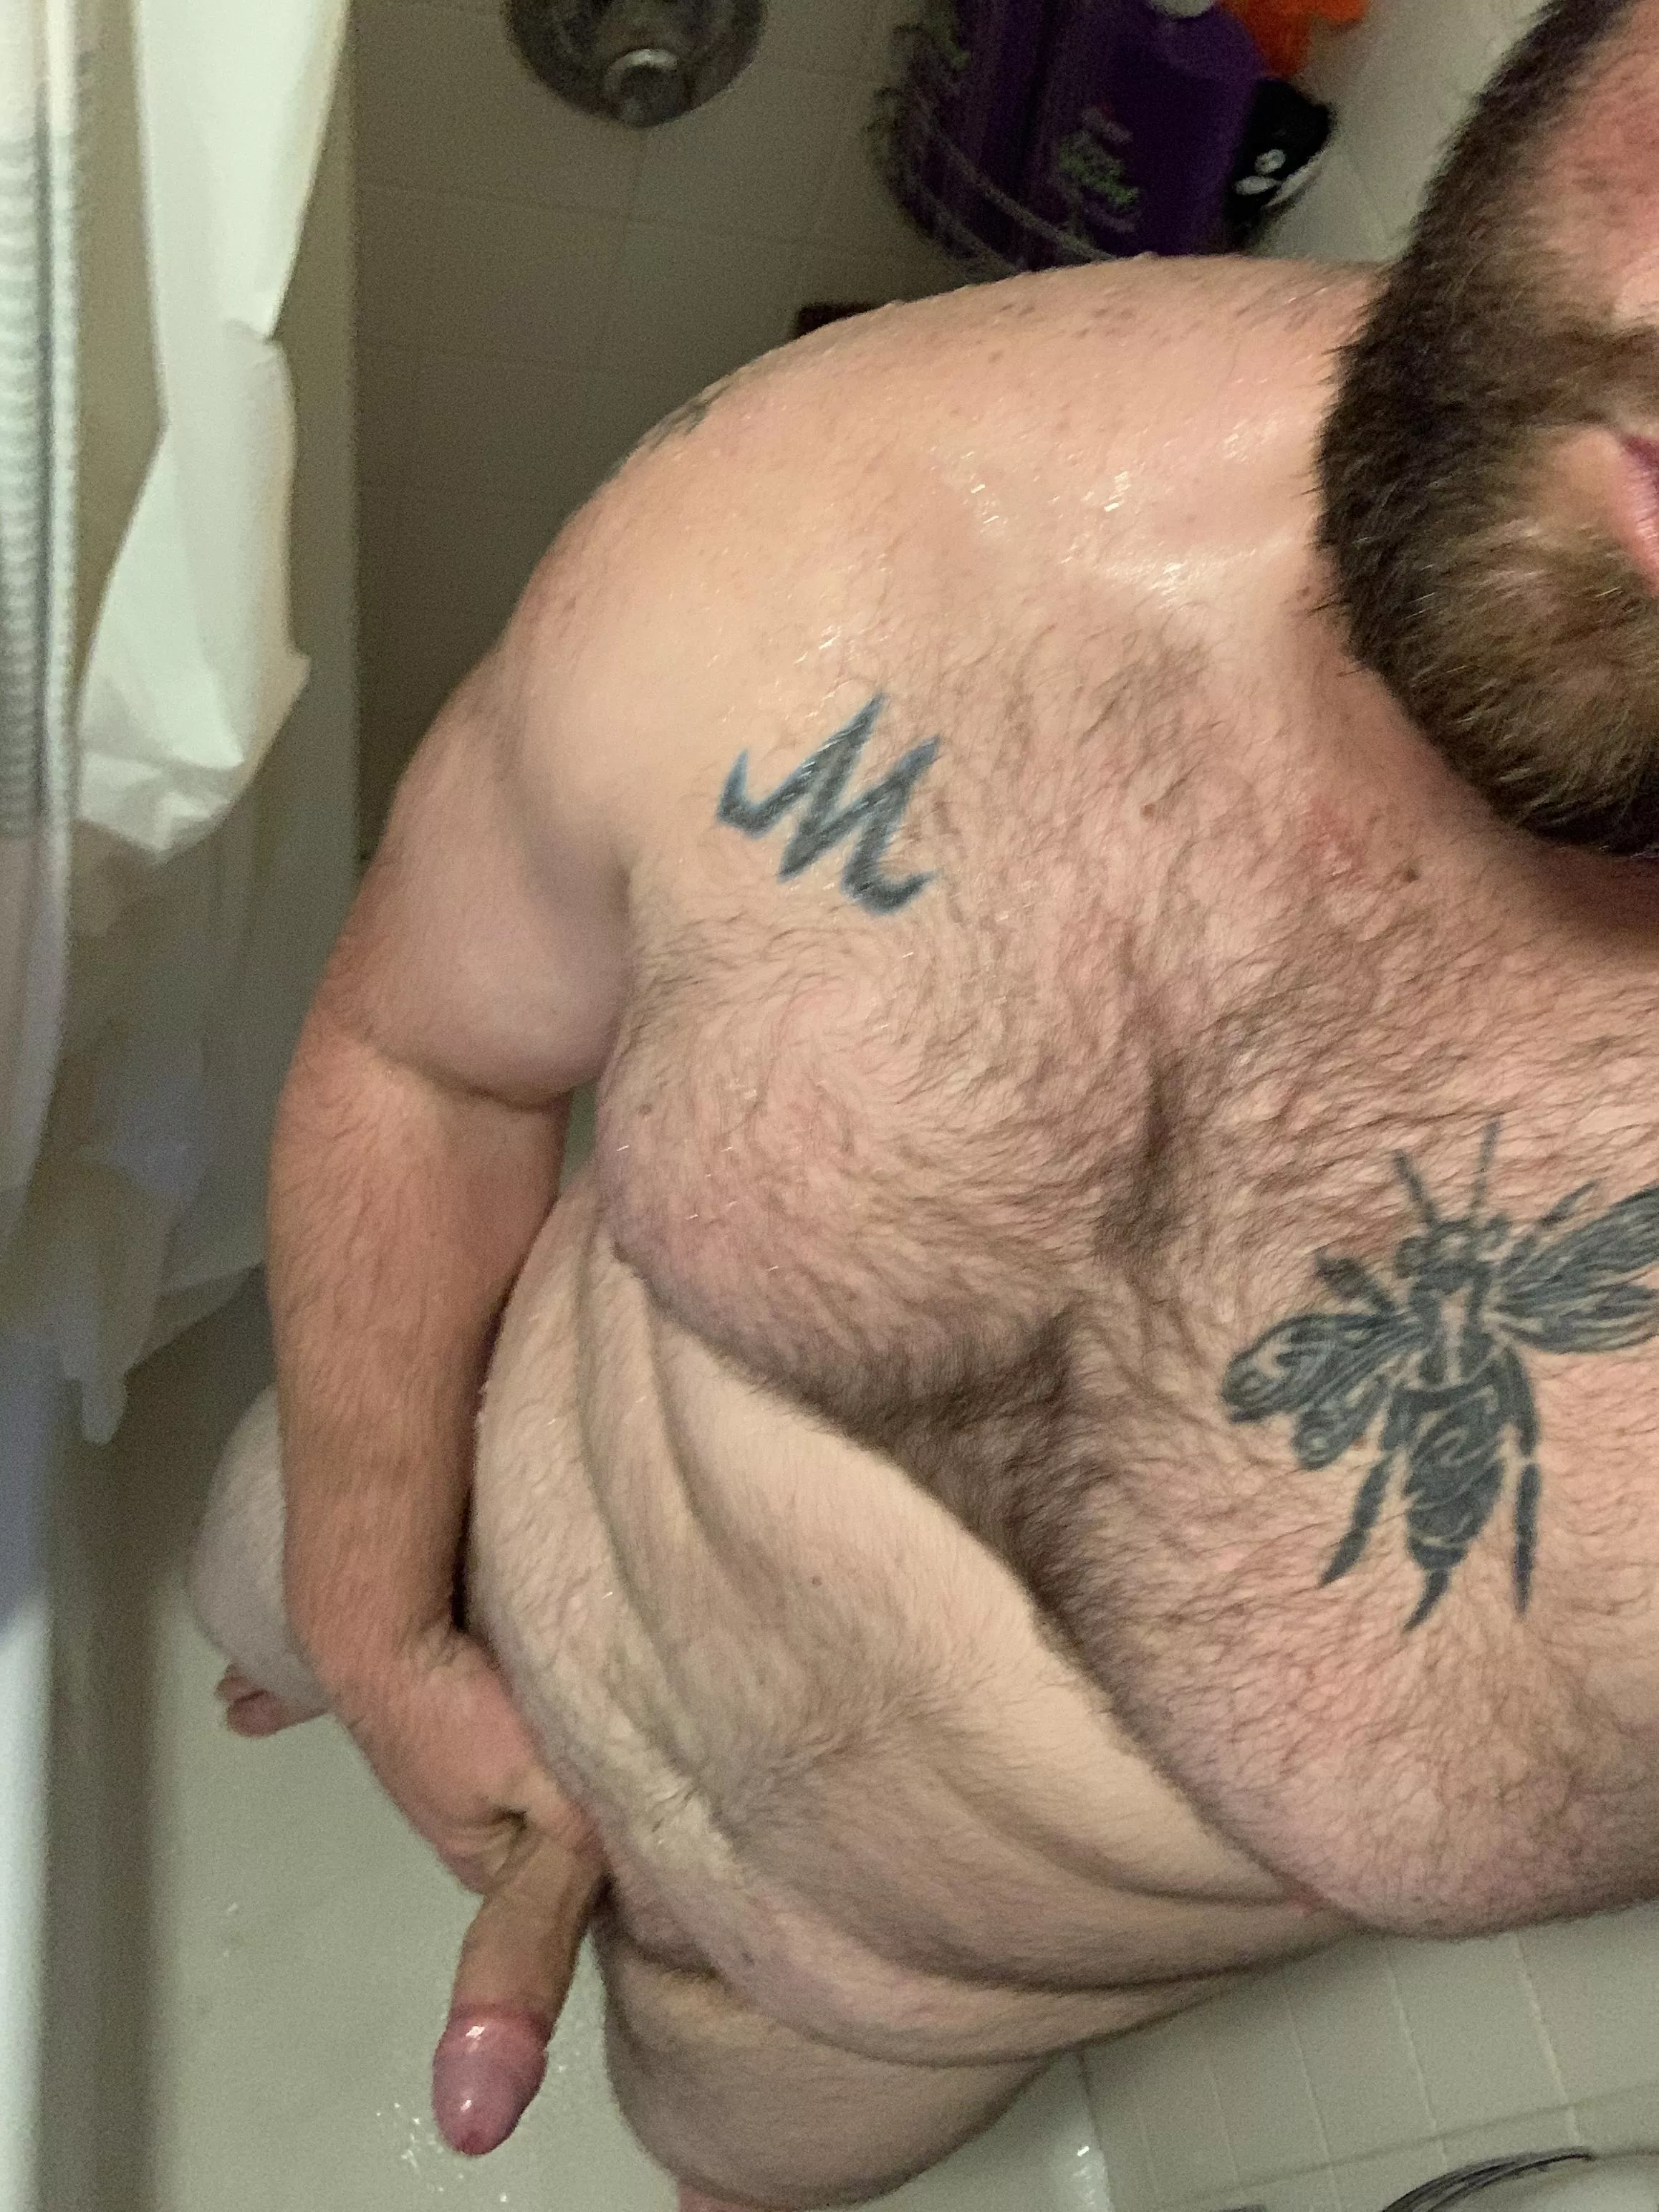 Fat Viking Girl - Anyone want some fat Viking dad cock nudes by thevain41